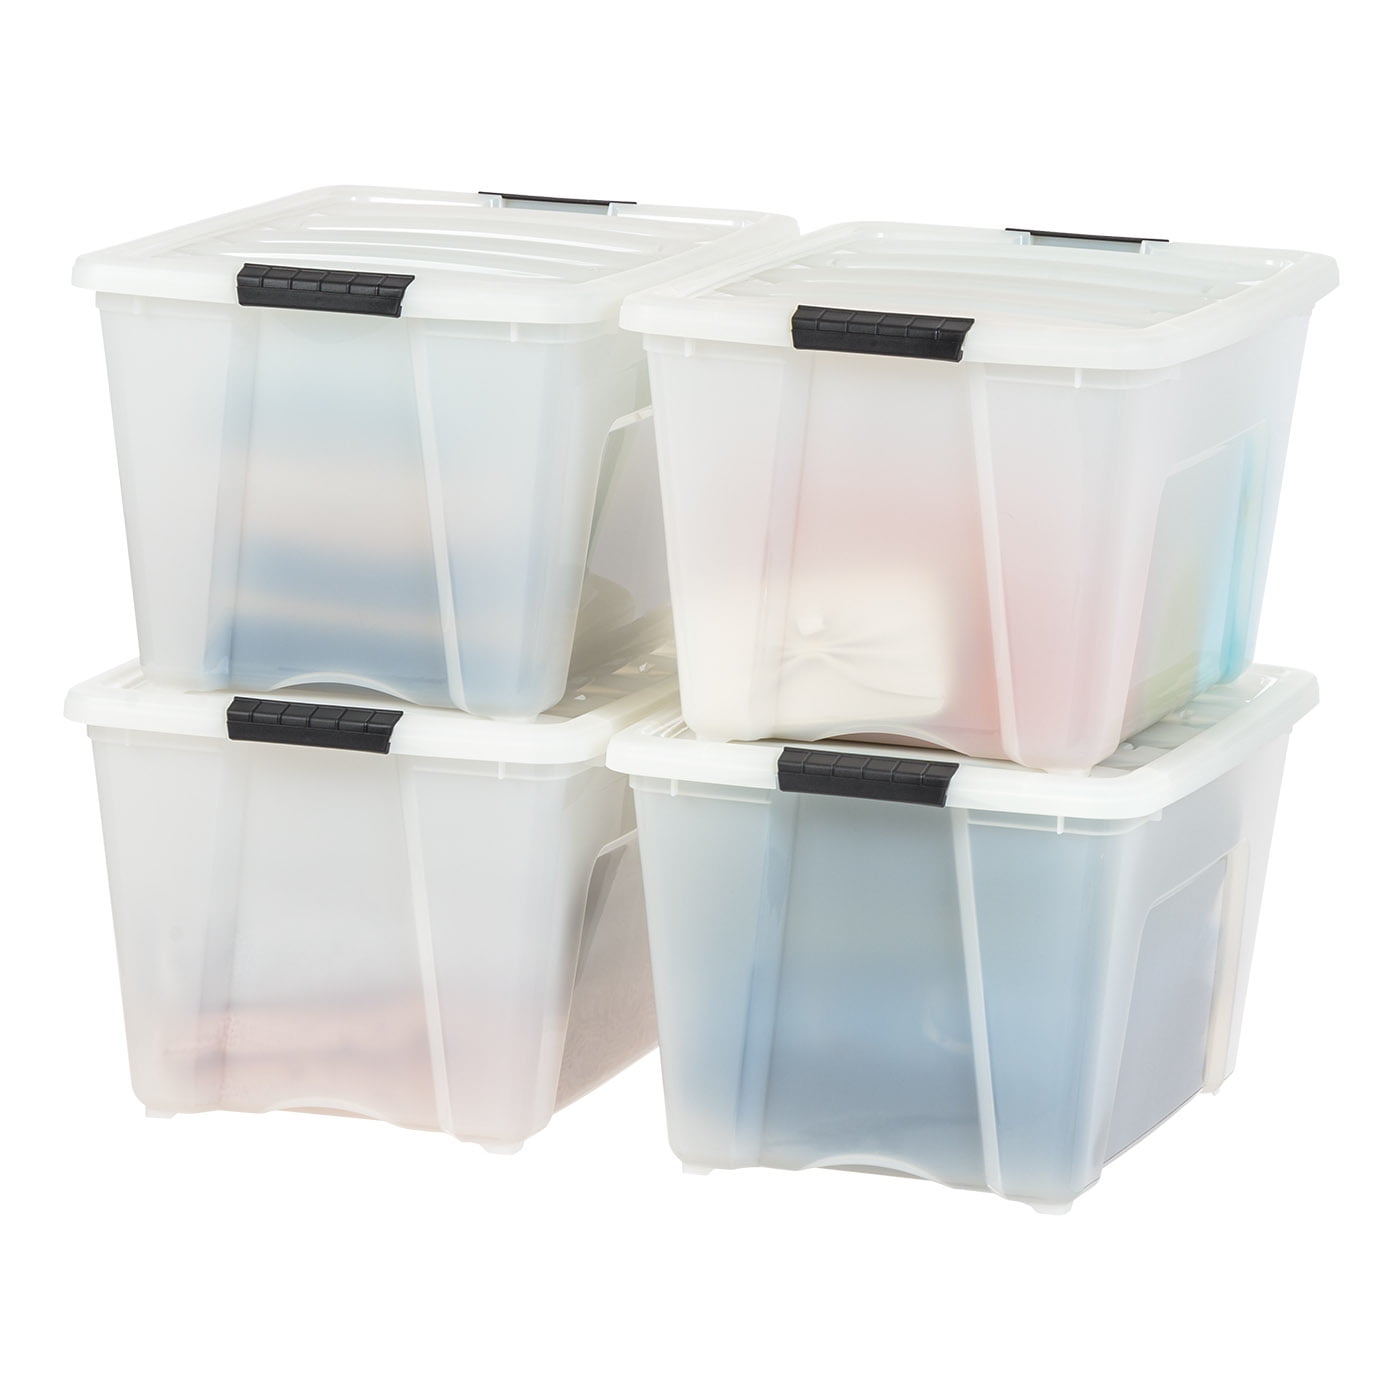  Karramlili Storage Bins with Lids - 20 Gal Stackable Storage  Bin 2 Packs Plastic Collapsible Closet Organizer with Doors, Folding Storage  Box with Wheels & Secure Buckle, X-Large Storage Containers